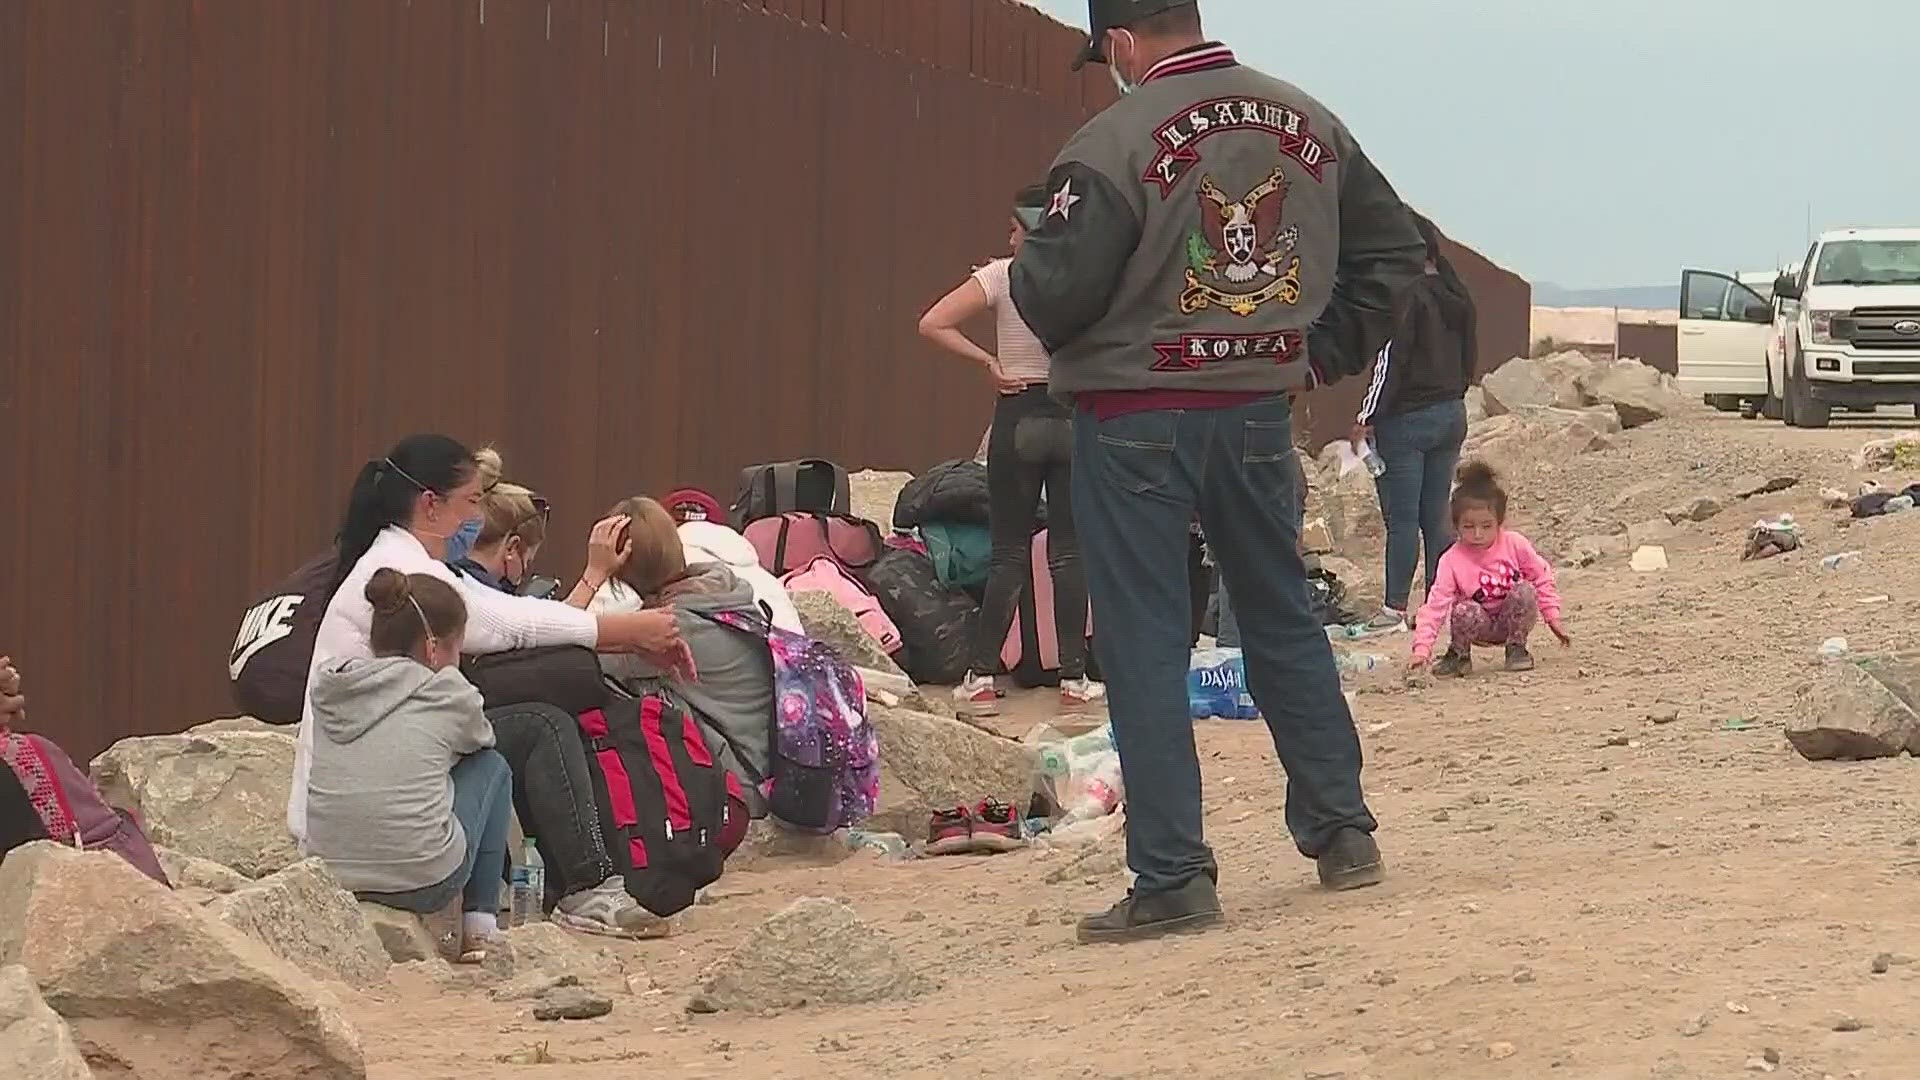 Arizona border communities are bracing for a surge in migrants in the coming weeks.